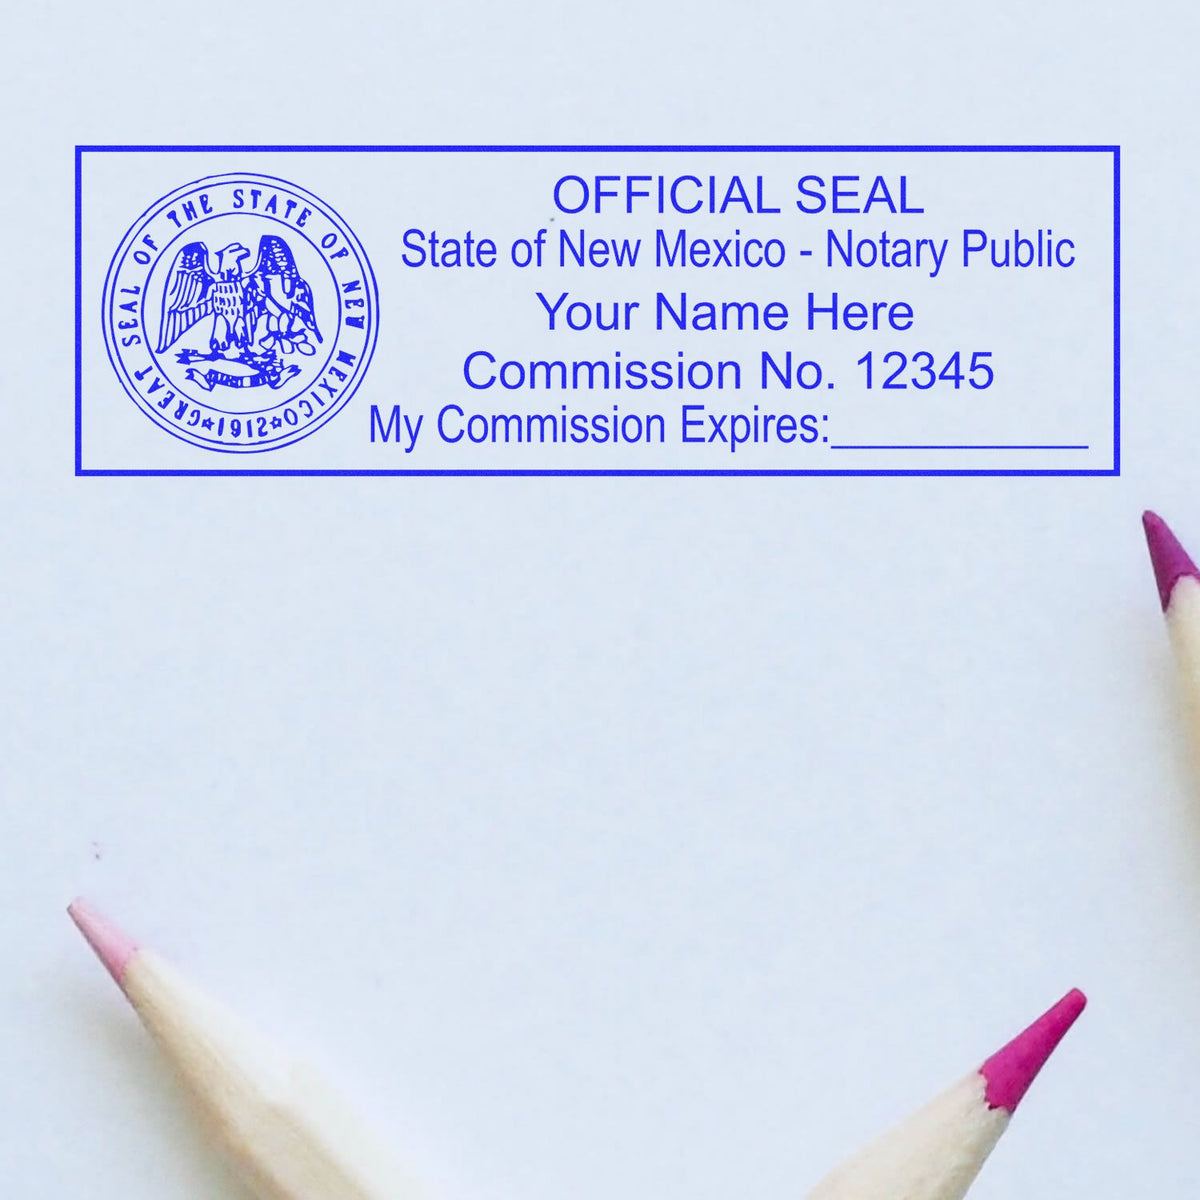 This paper is stamped with a sample imprint of the Slim Pre-Inked State Seal Notary Stamp for New Mexico, signifying its quality and reliability.